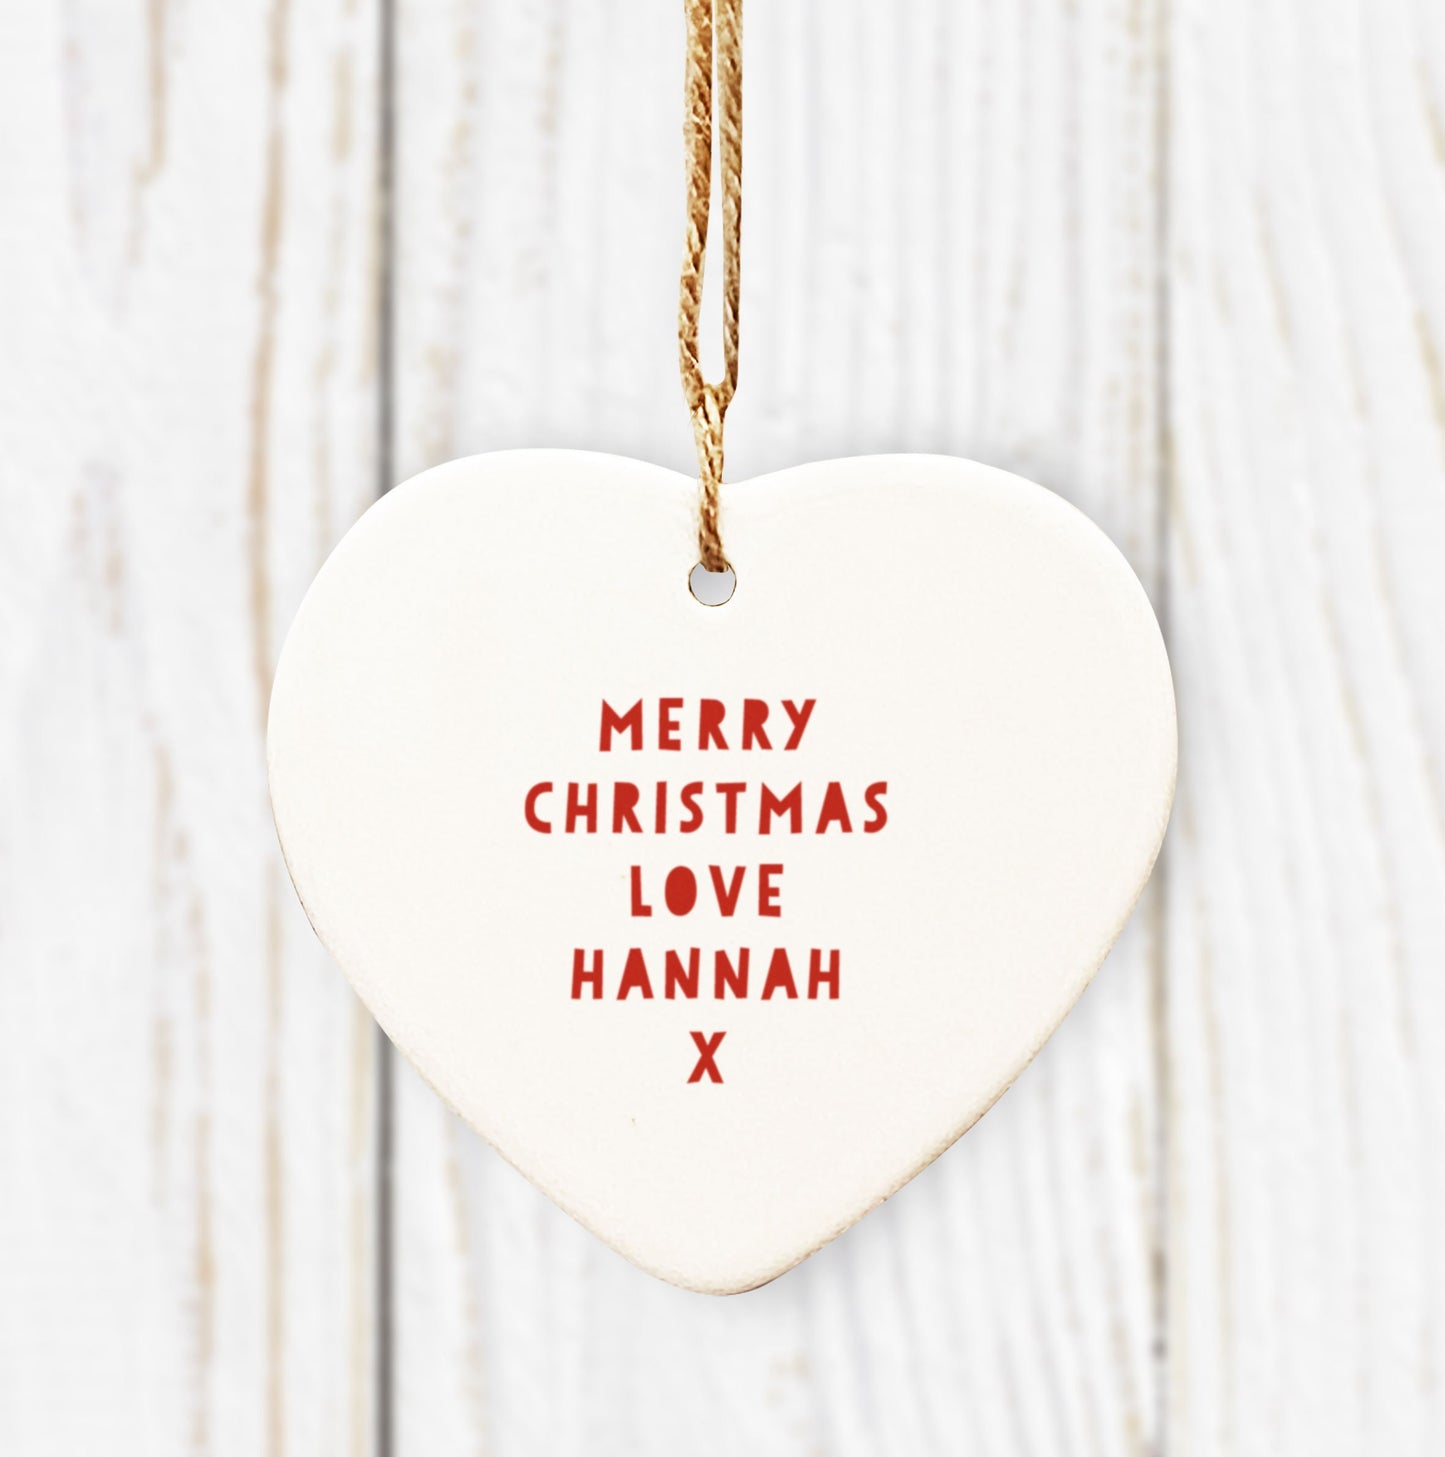 Merry Christmas Duck Heart Tree Decoration. Stoke on Trent Christmas Decoration. Potteries Christmas.Personalised Tree Bauble